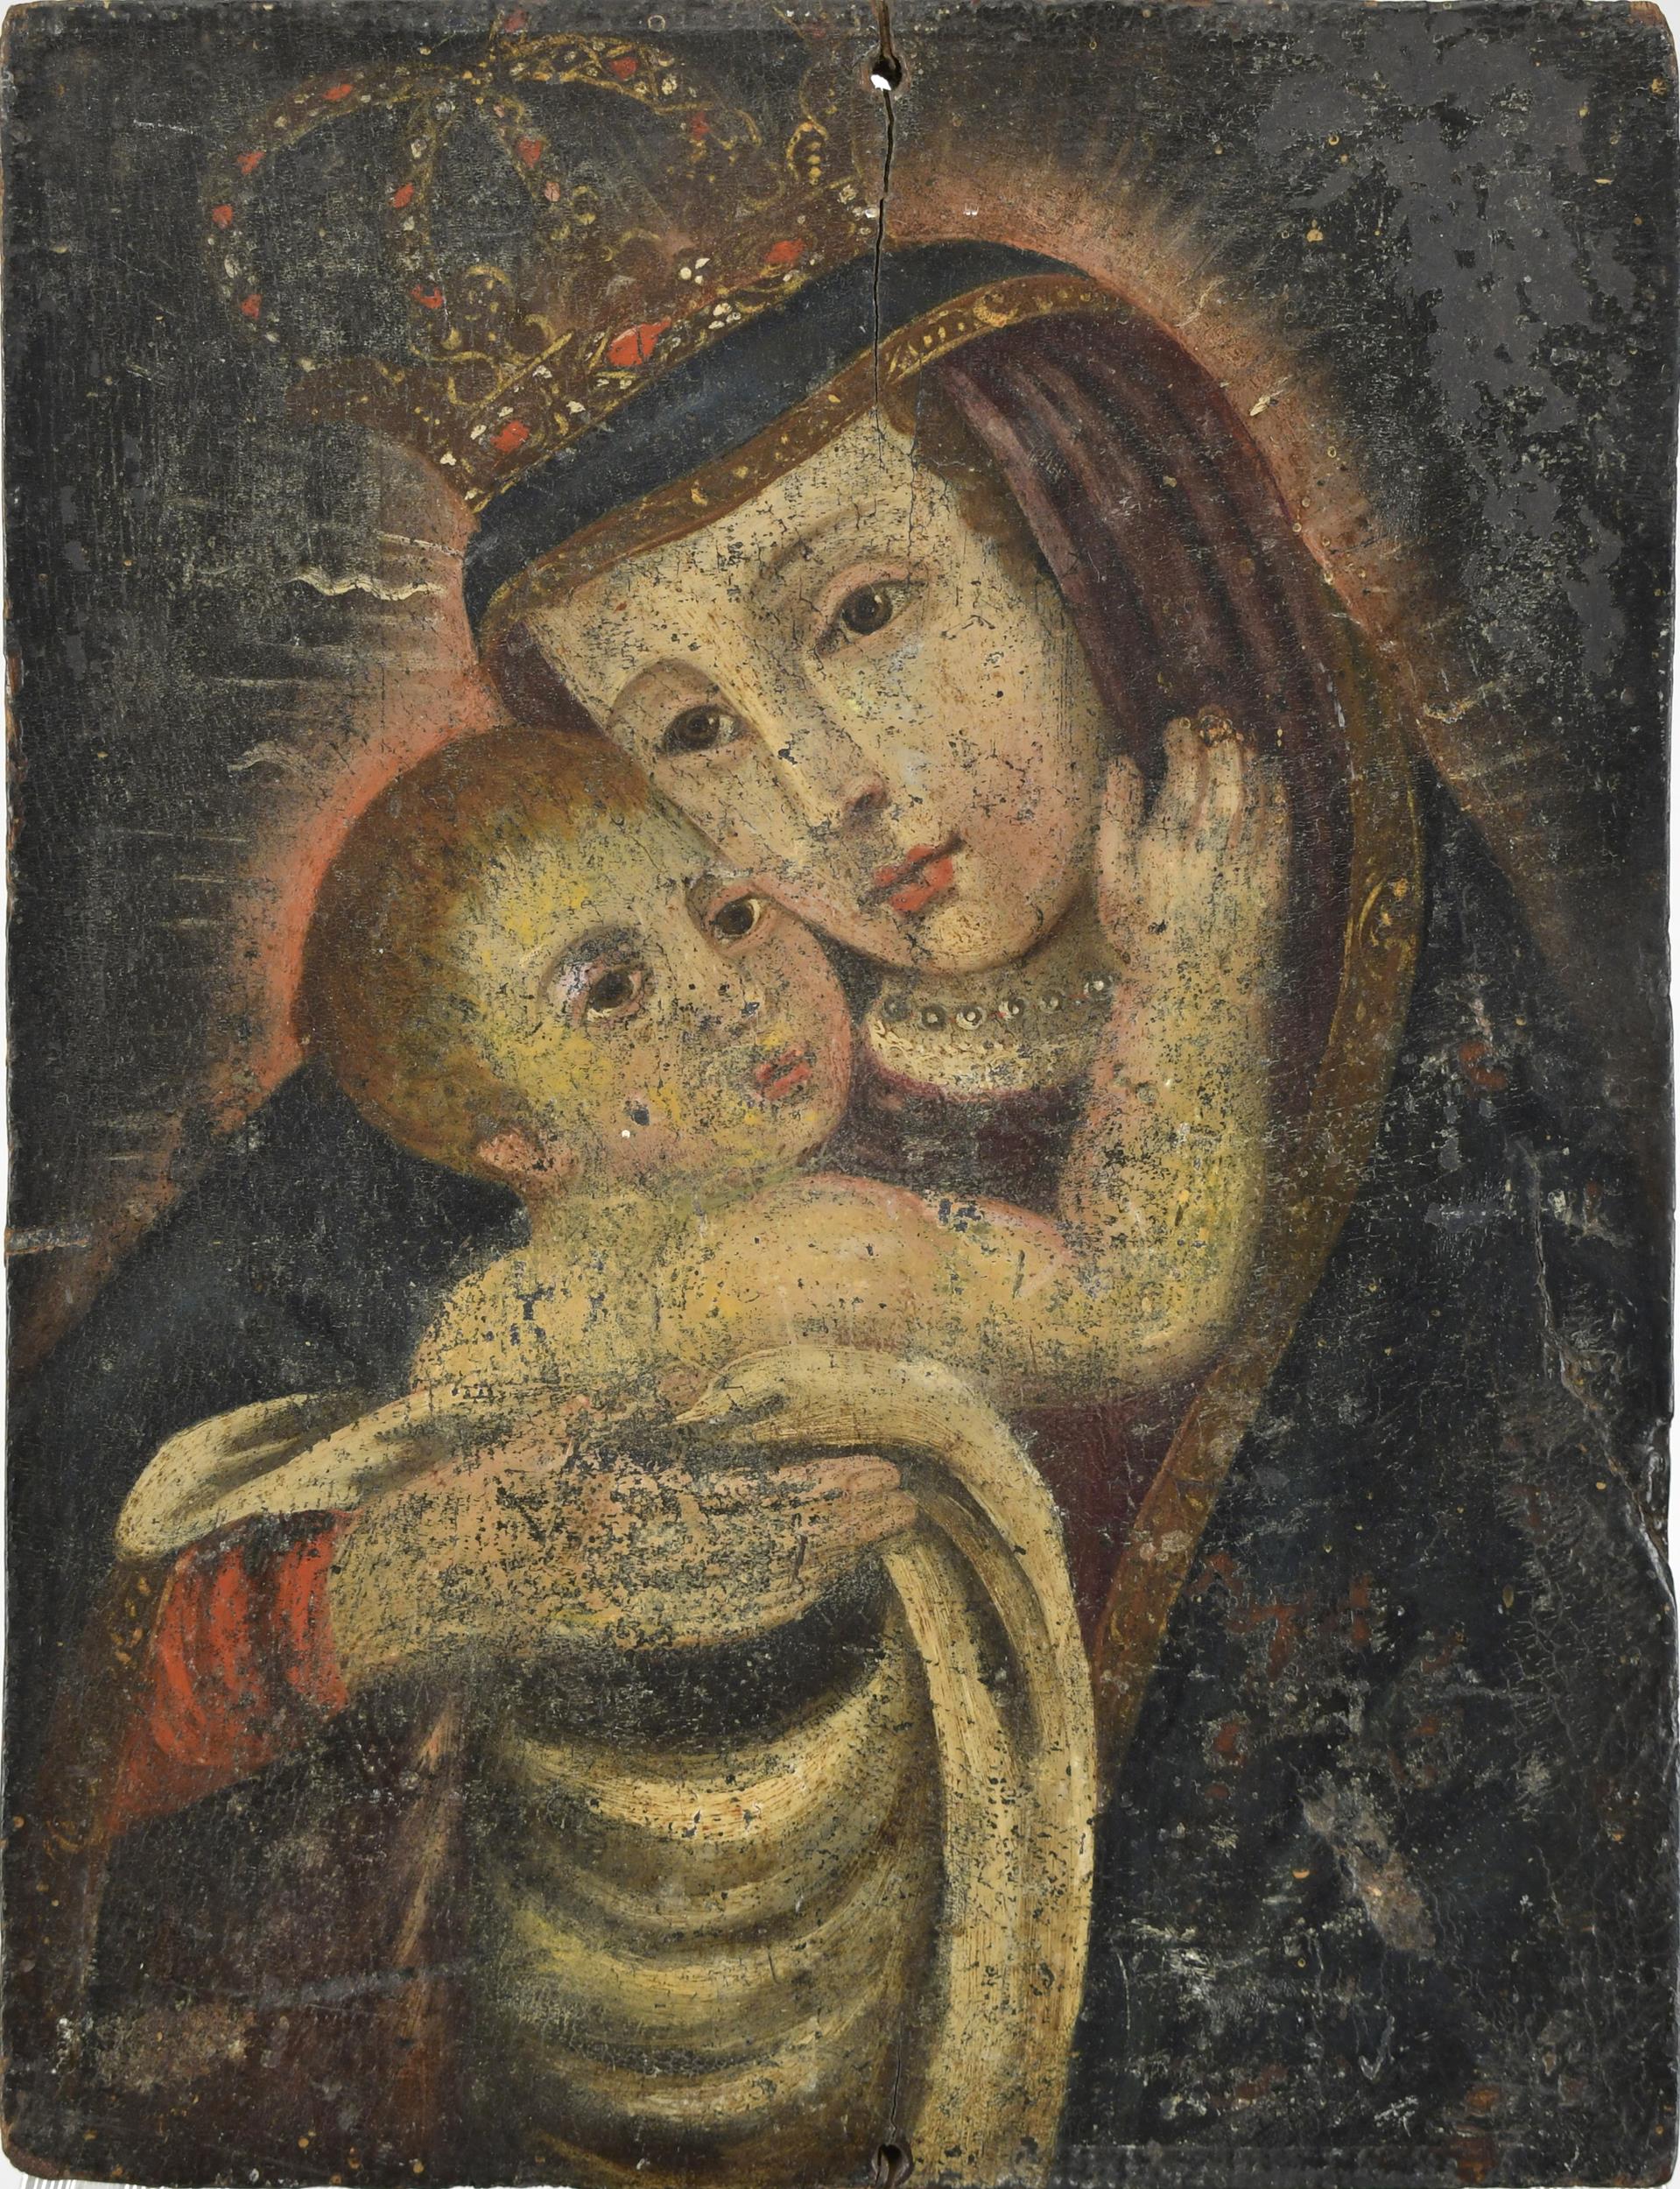 EARLY EUROPEAN PAINTING ON WOOD  3ab0d0